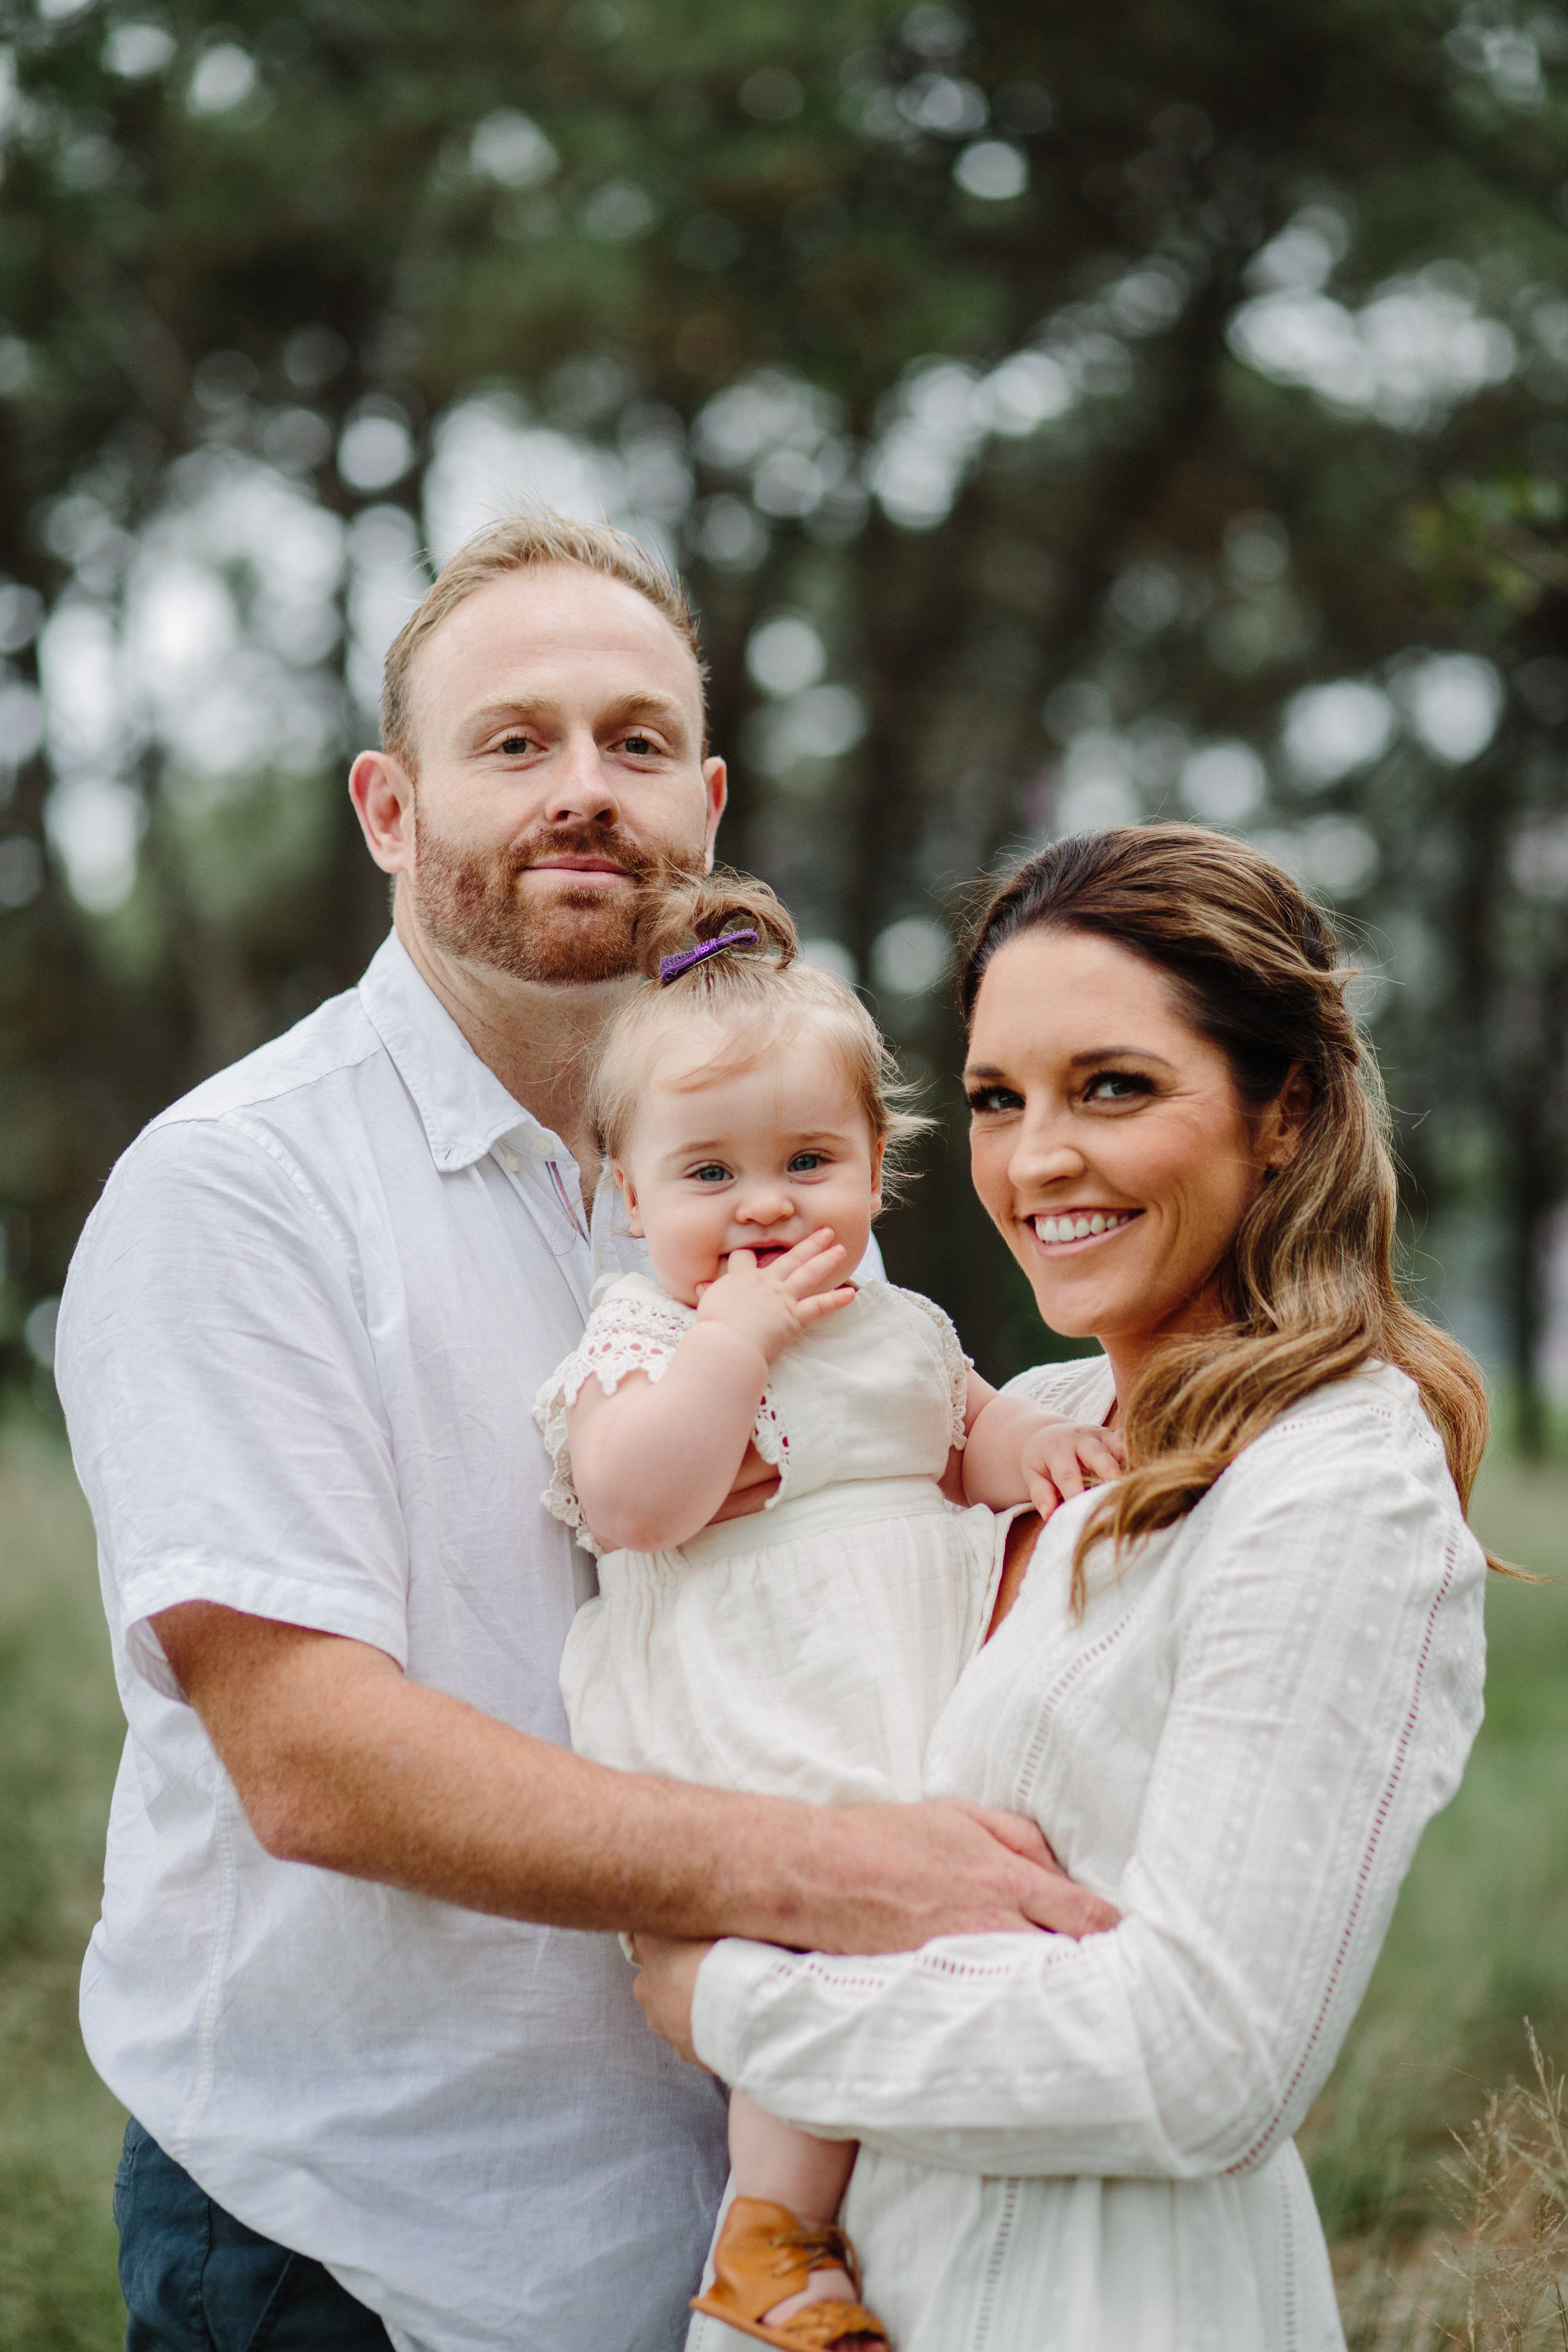 Family Portraits | Sydney and surrounds